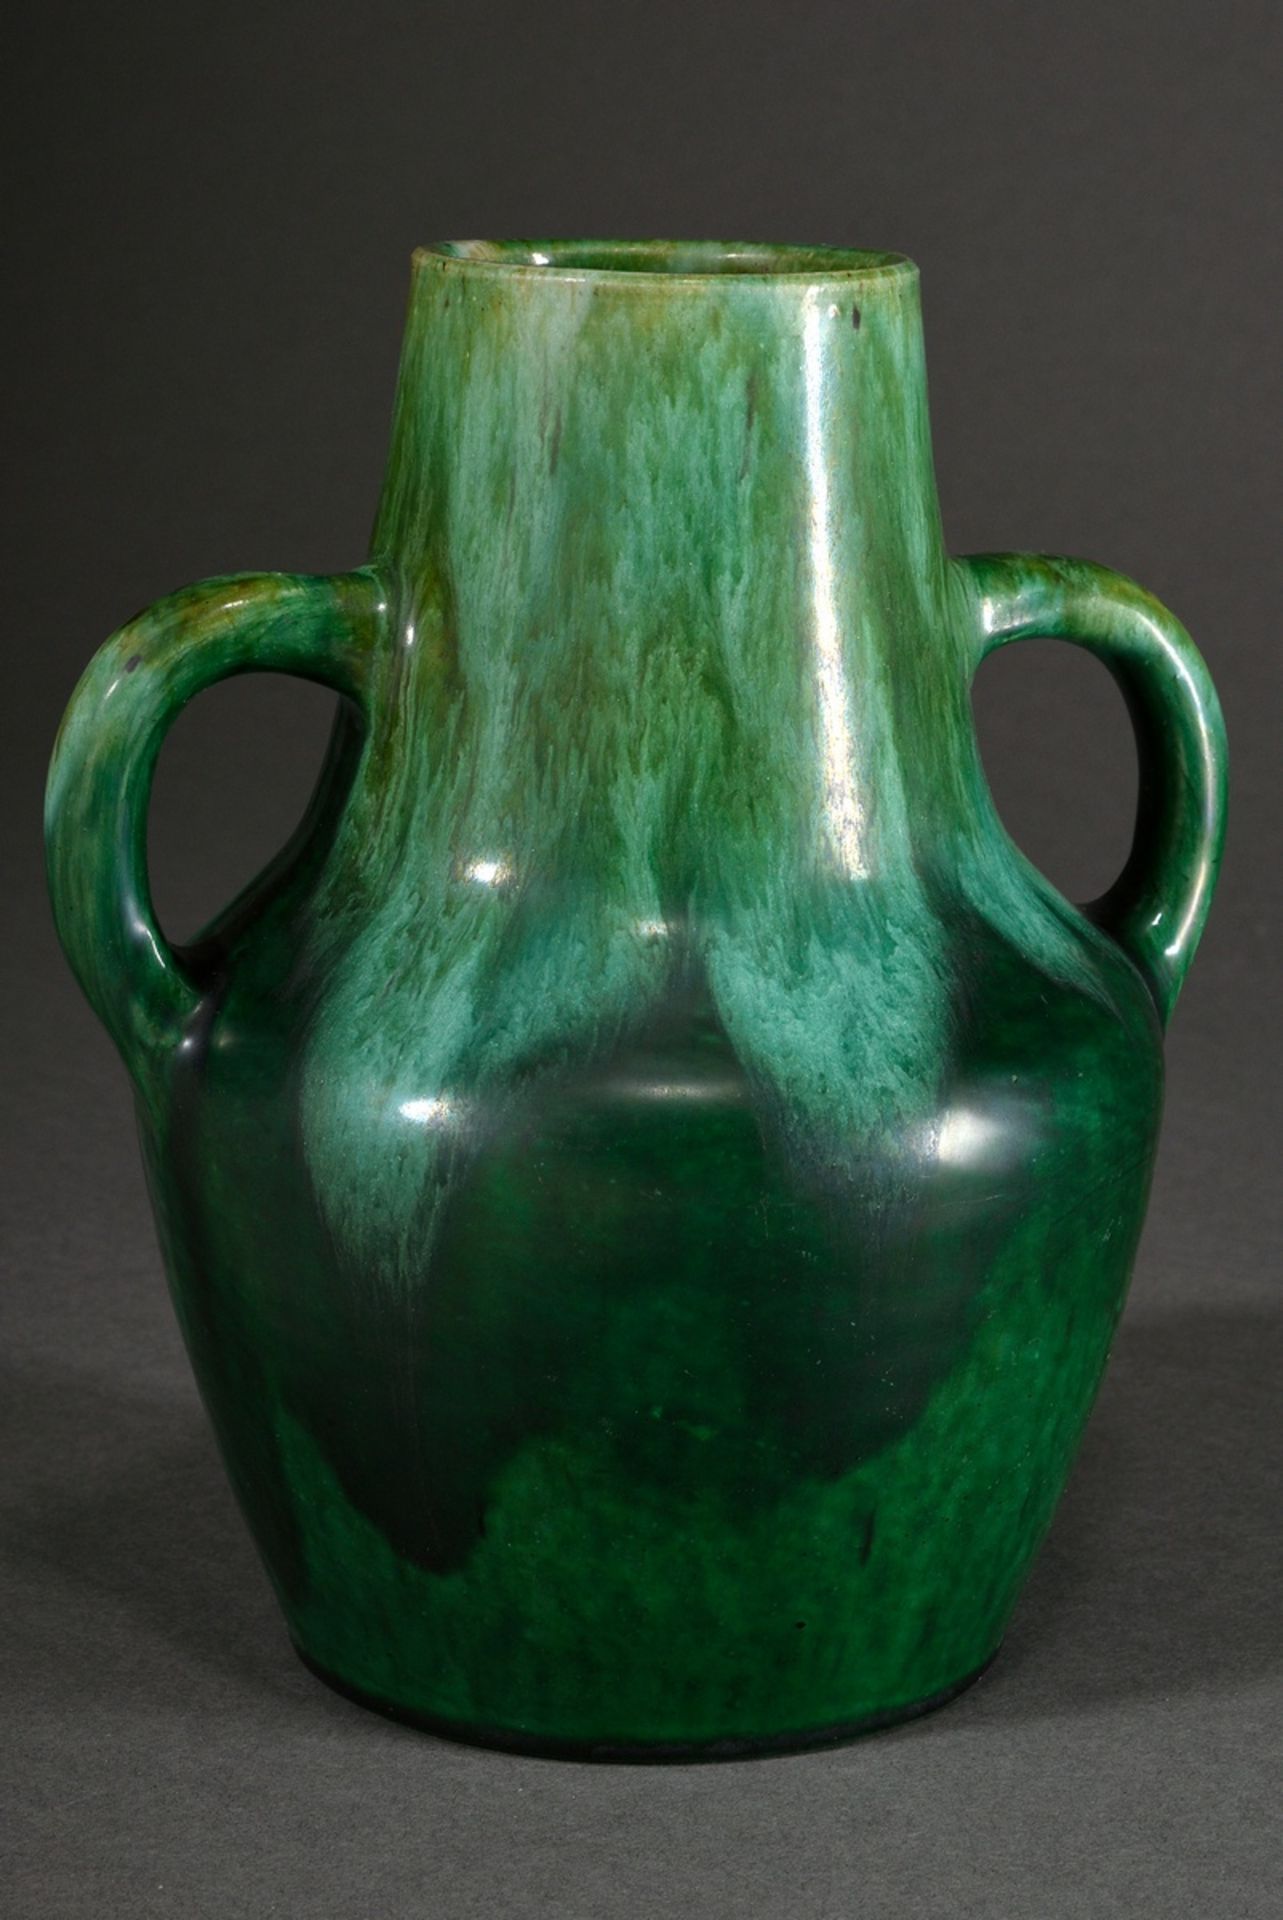 Small ceramic vase with tapering neck and two handles, ceramic with gradient glaze in shades of gre - Image 2 of 5